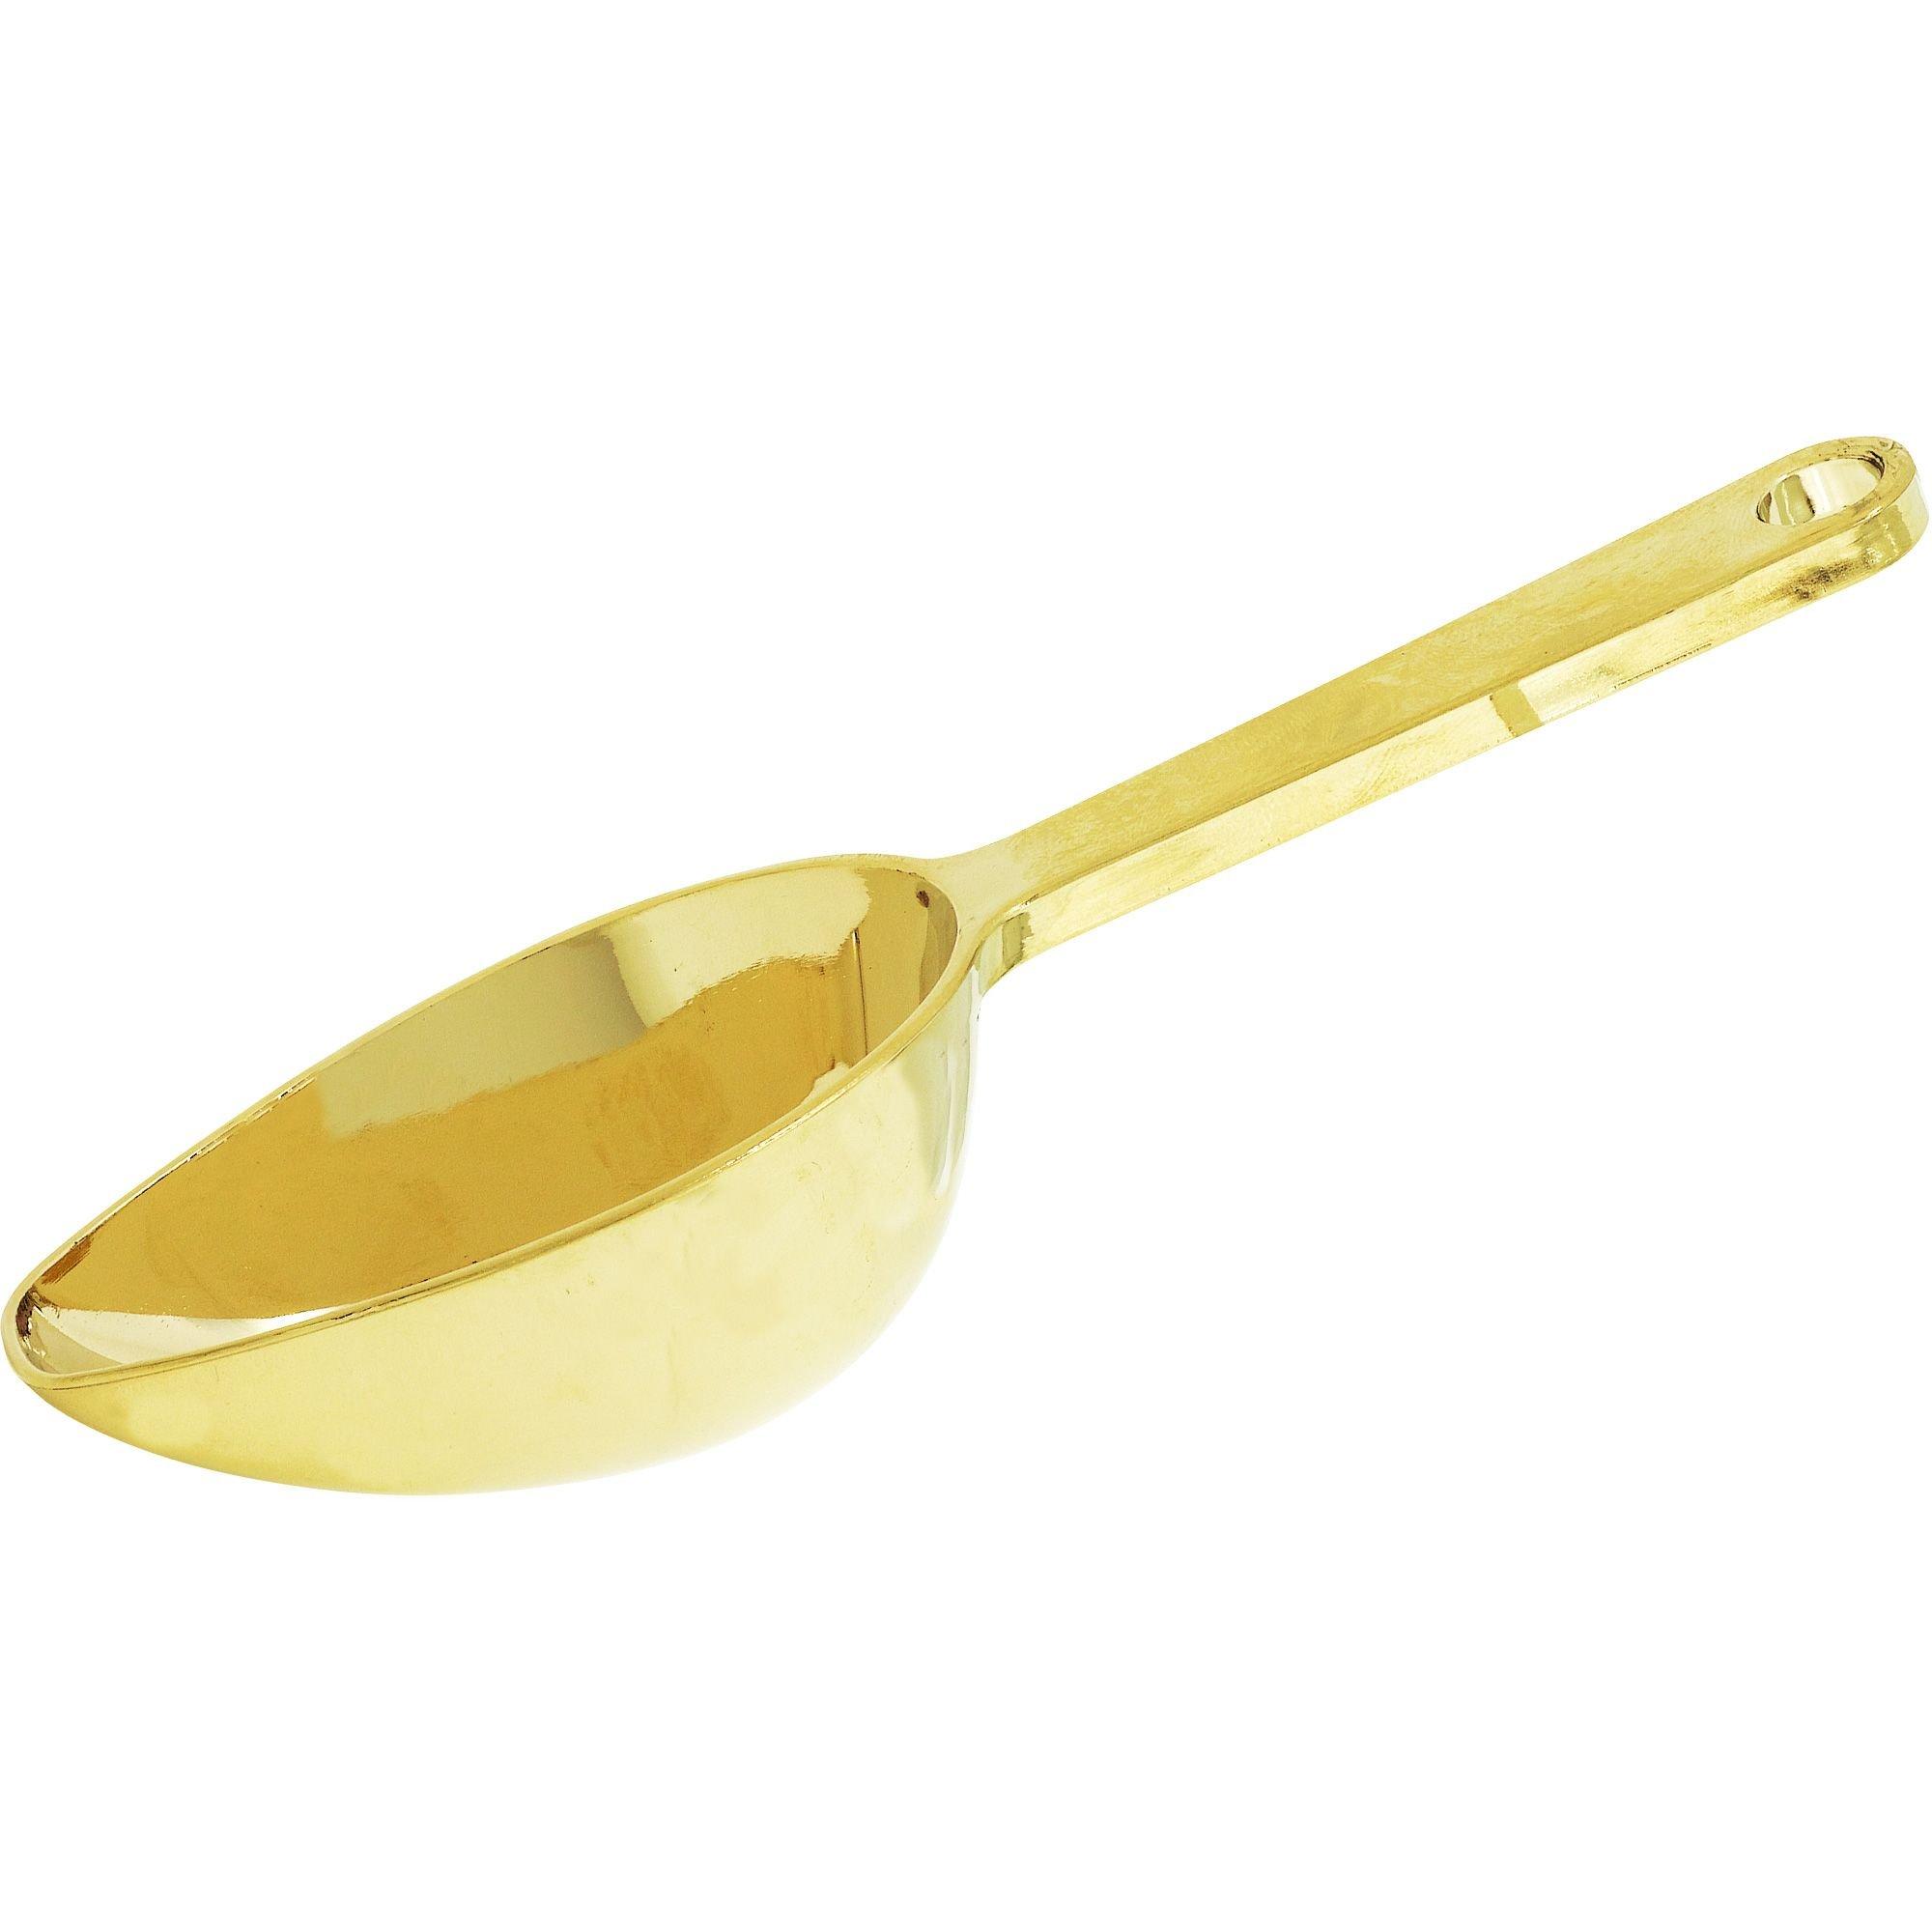 Candy Scoop - Gold